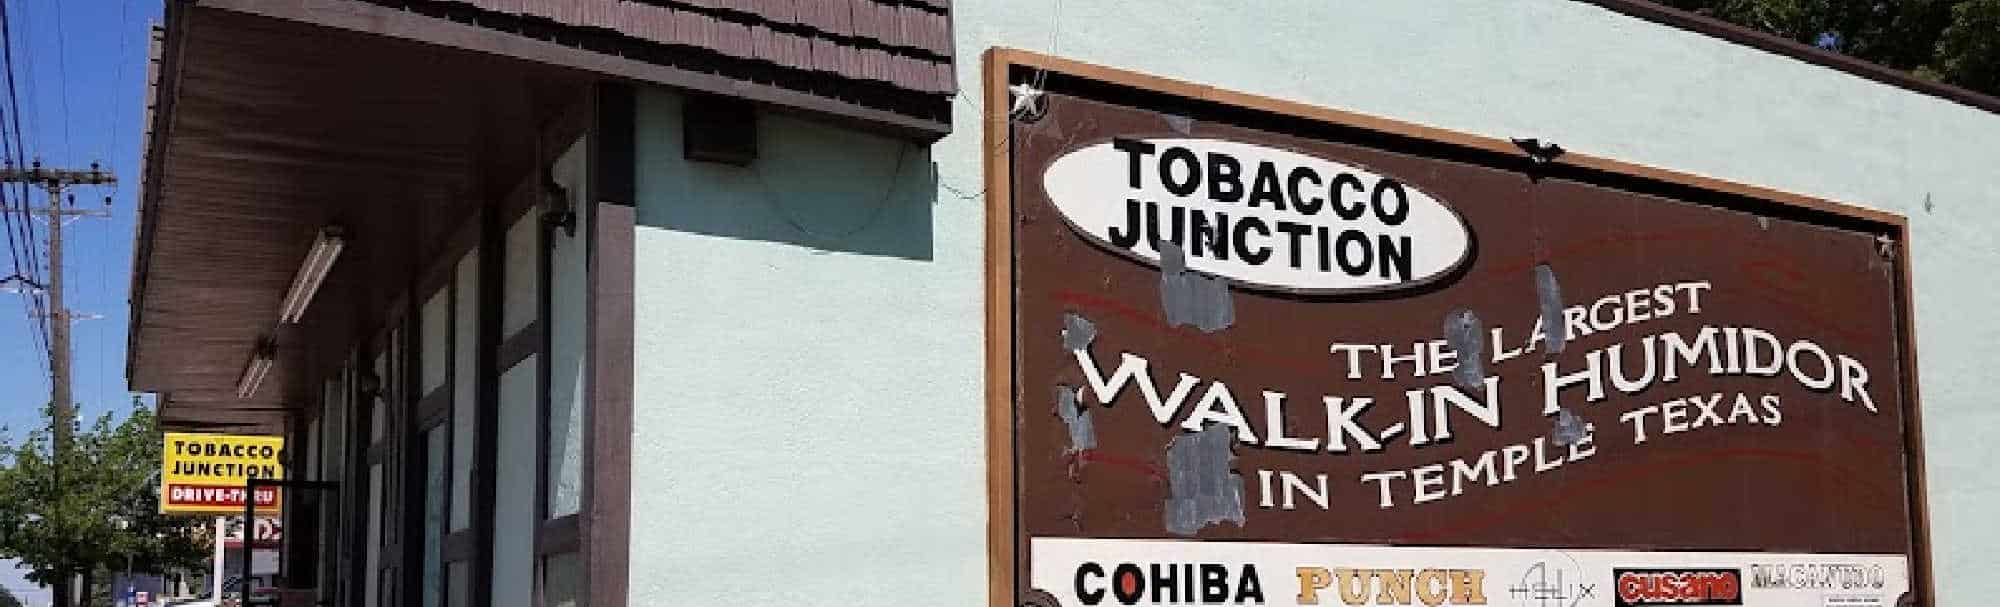 image of tobacco junction in temple texas